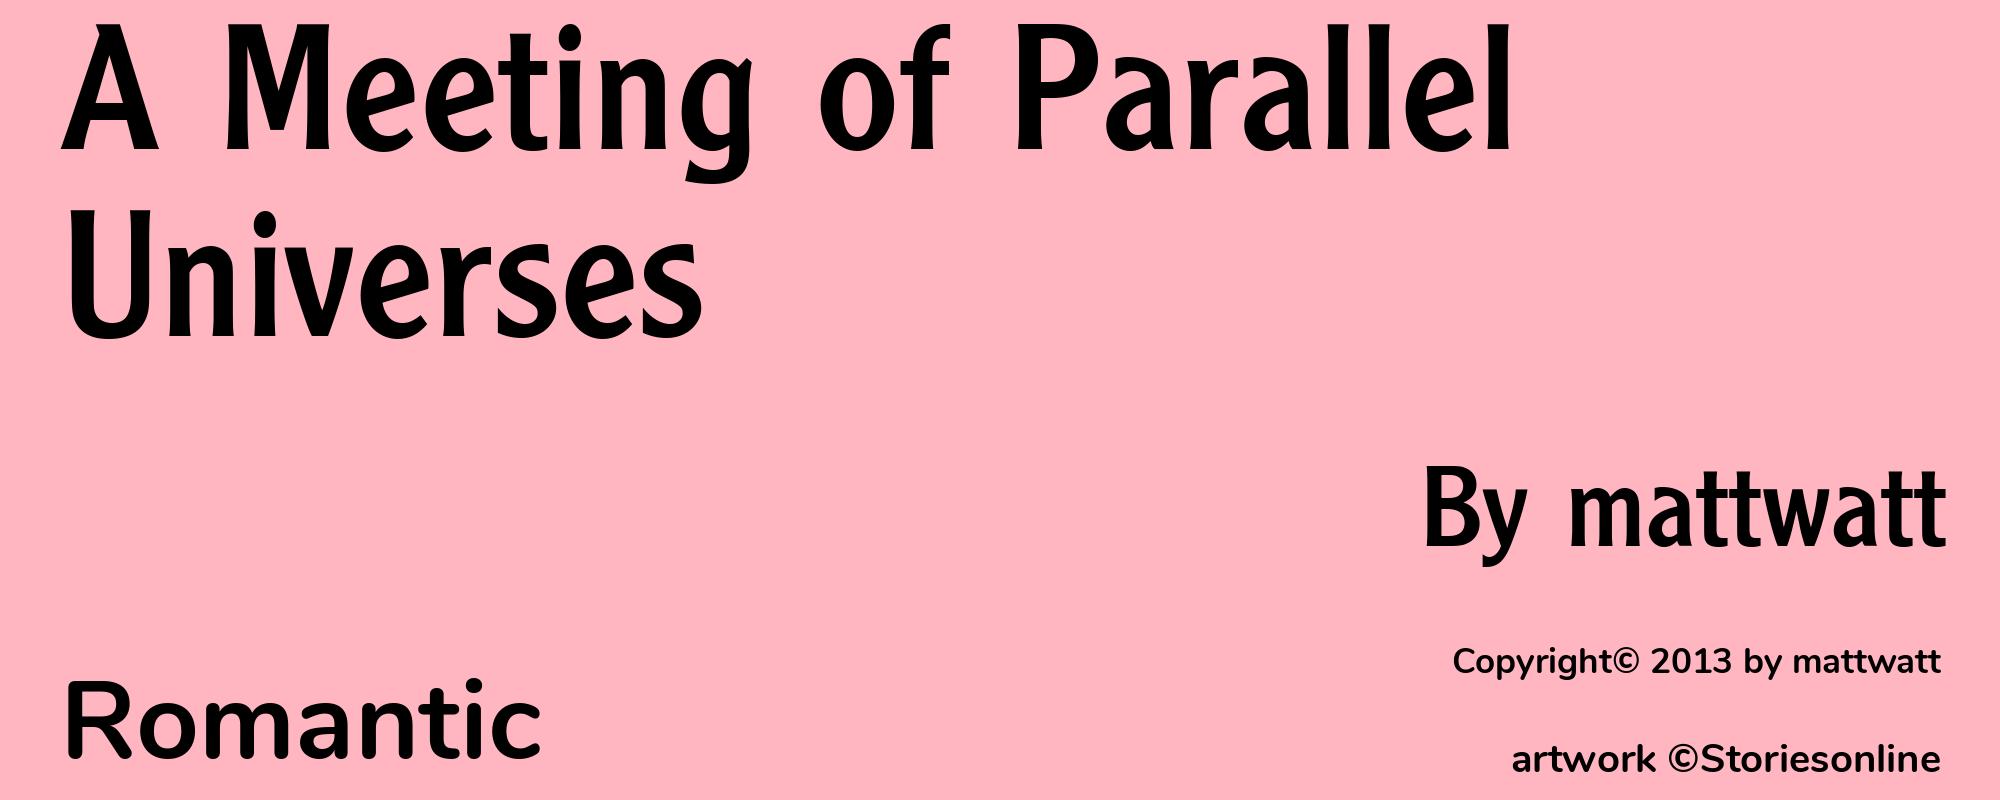 A Meeting of Parallel Universes - Cover